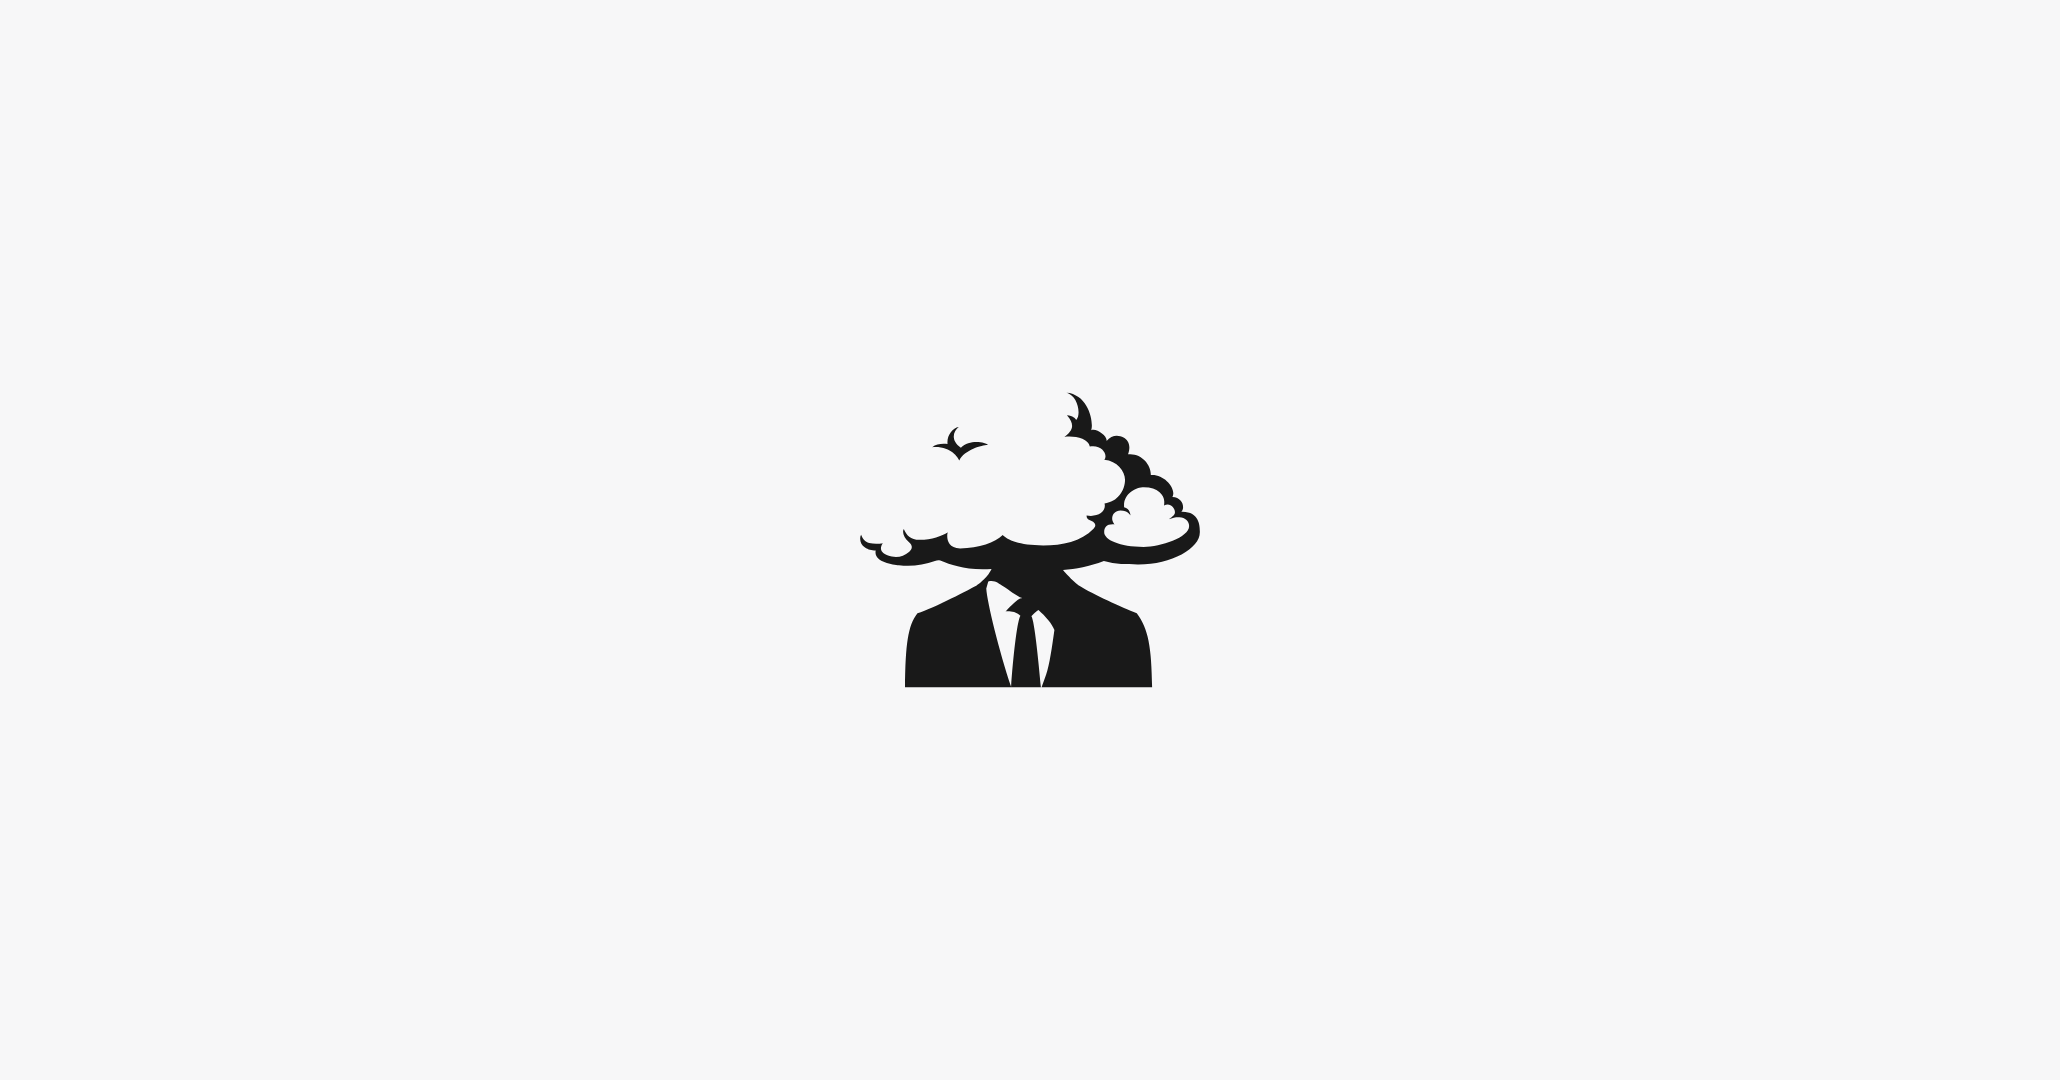 A minimalist illustration of a man with his head in a cloud